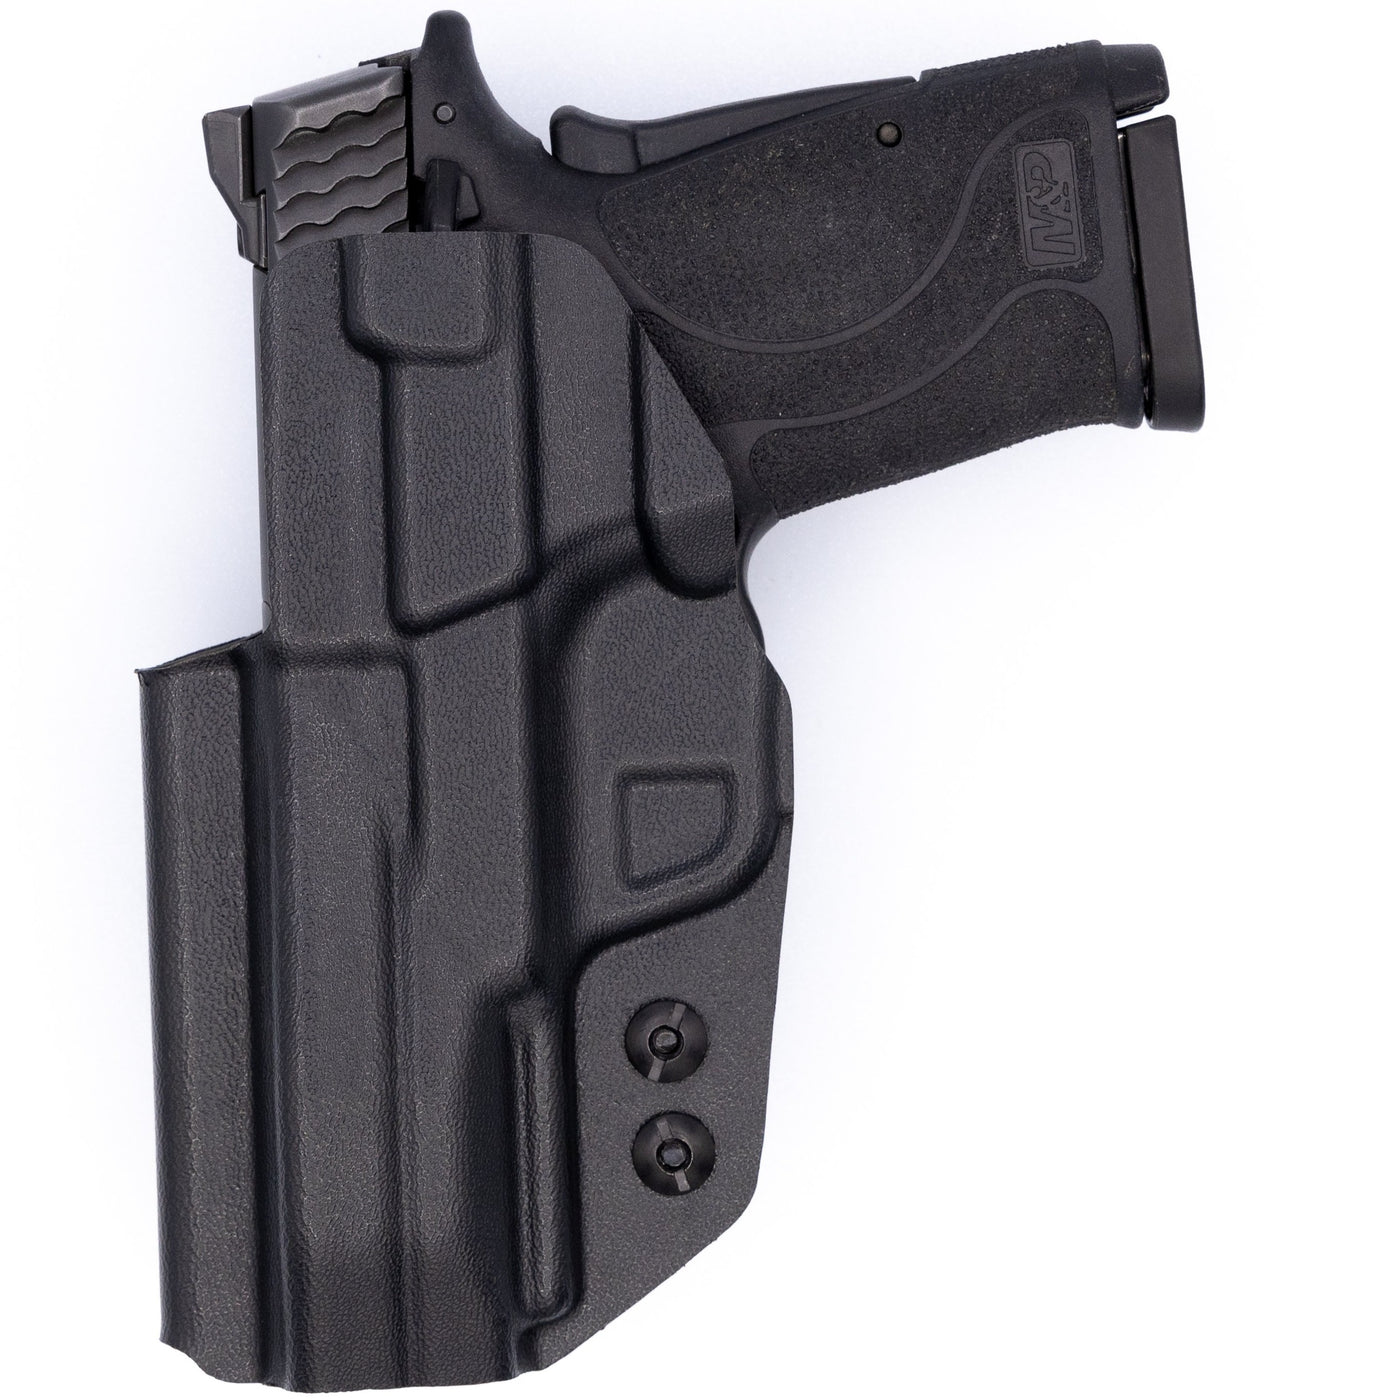 This is the custom C&G Holsters Covert series Inside the Waistband holster for the Smith & Wesson M&P Shield 9EZ showing a rear view.